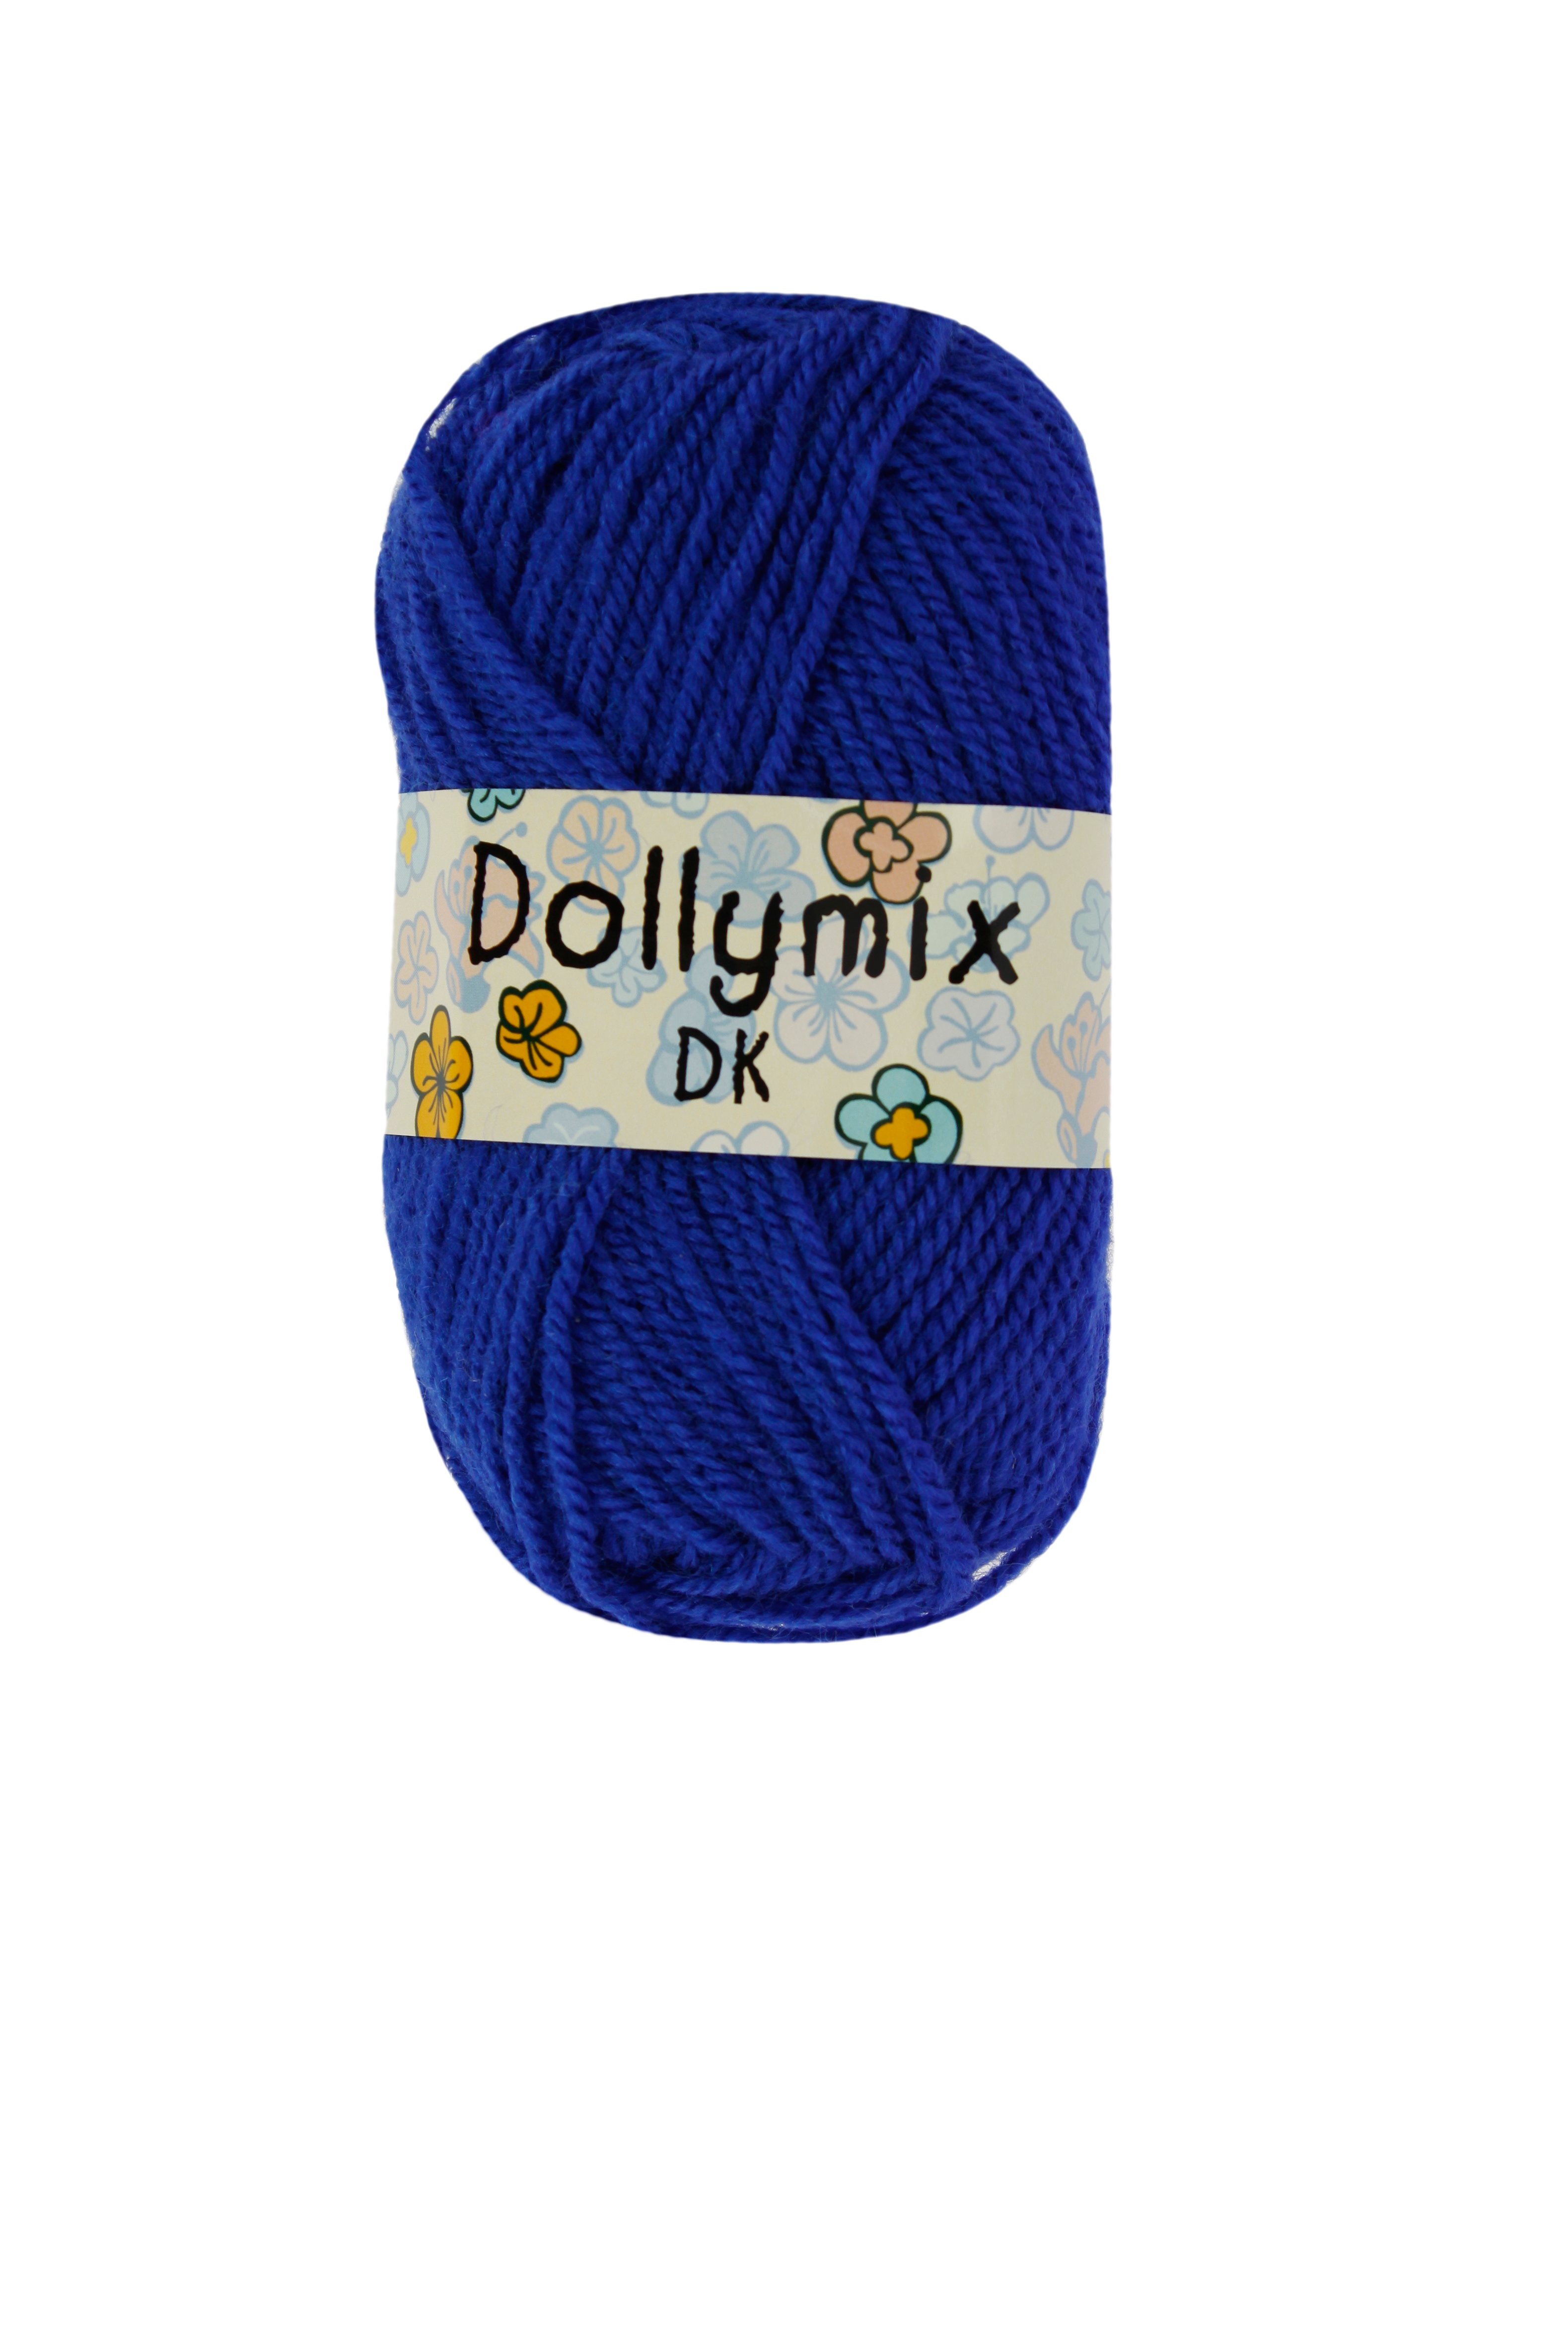 Dolly Mix DK 25g Balls Assorted Colour x10 Packs